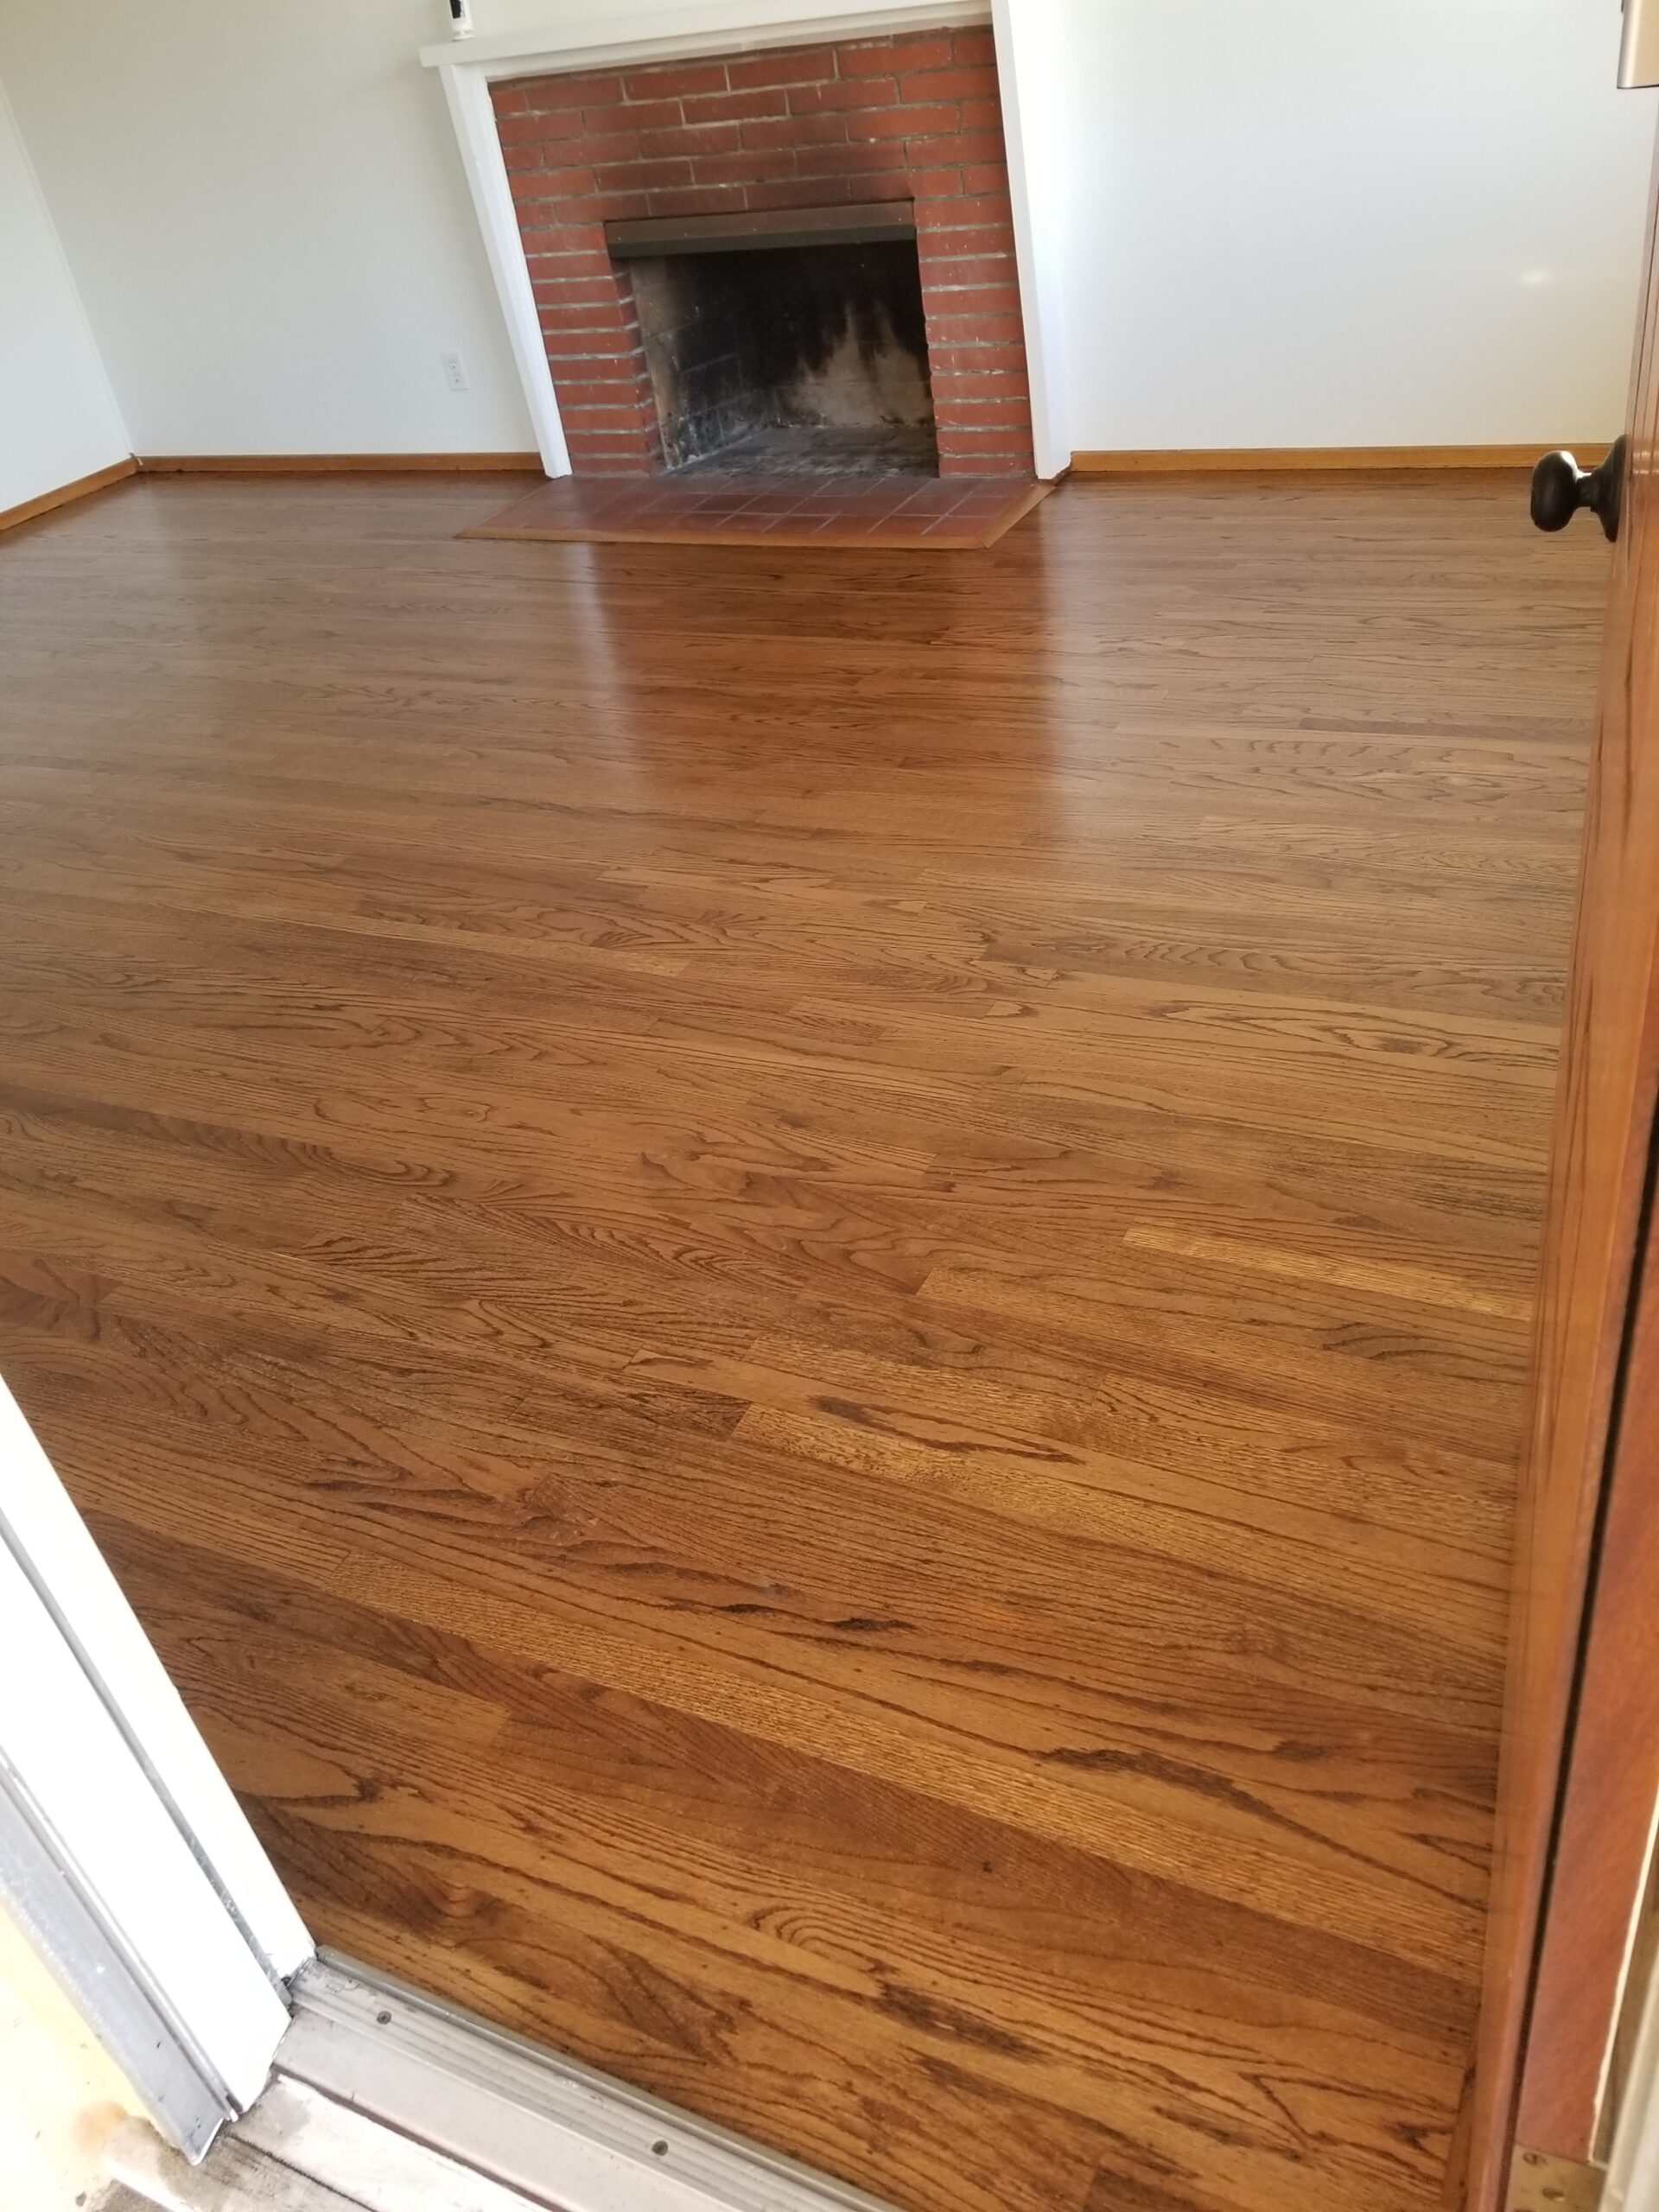 Refinish red oak floor with semi-gloss antique stain 275 square feet, Sunnyvale residential. 